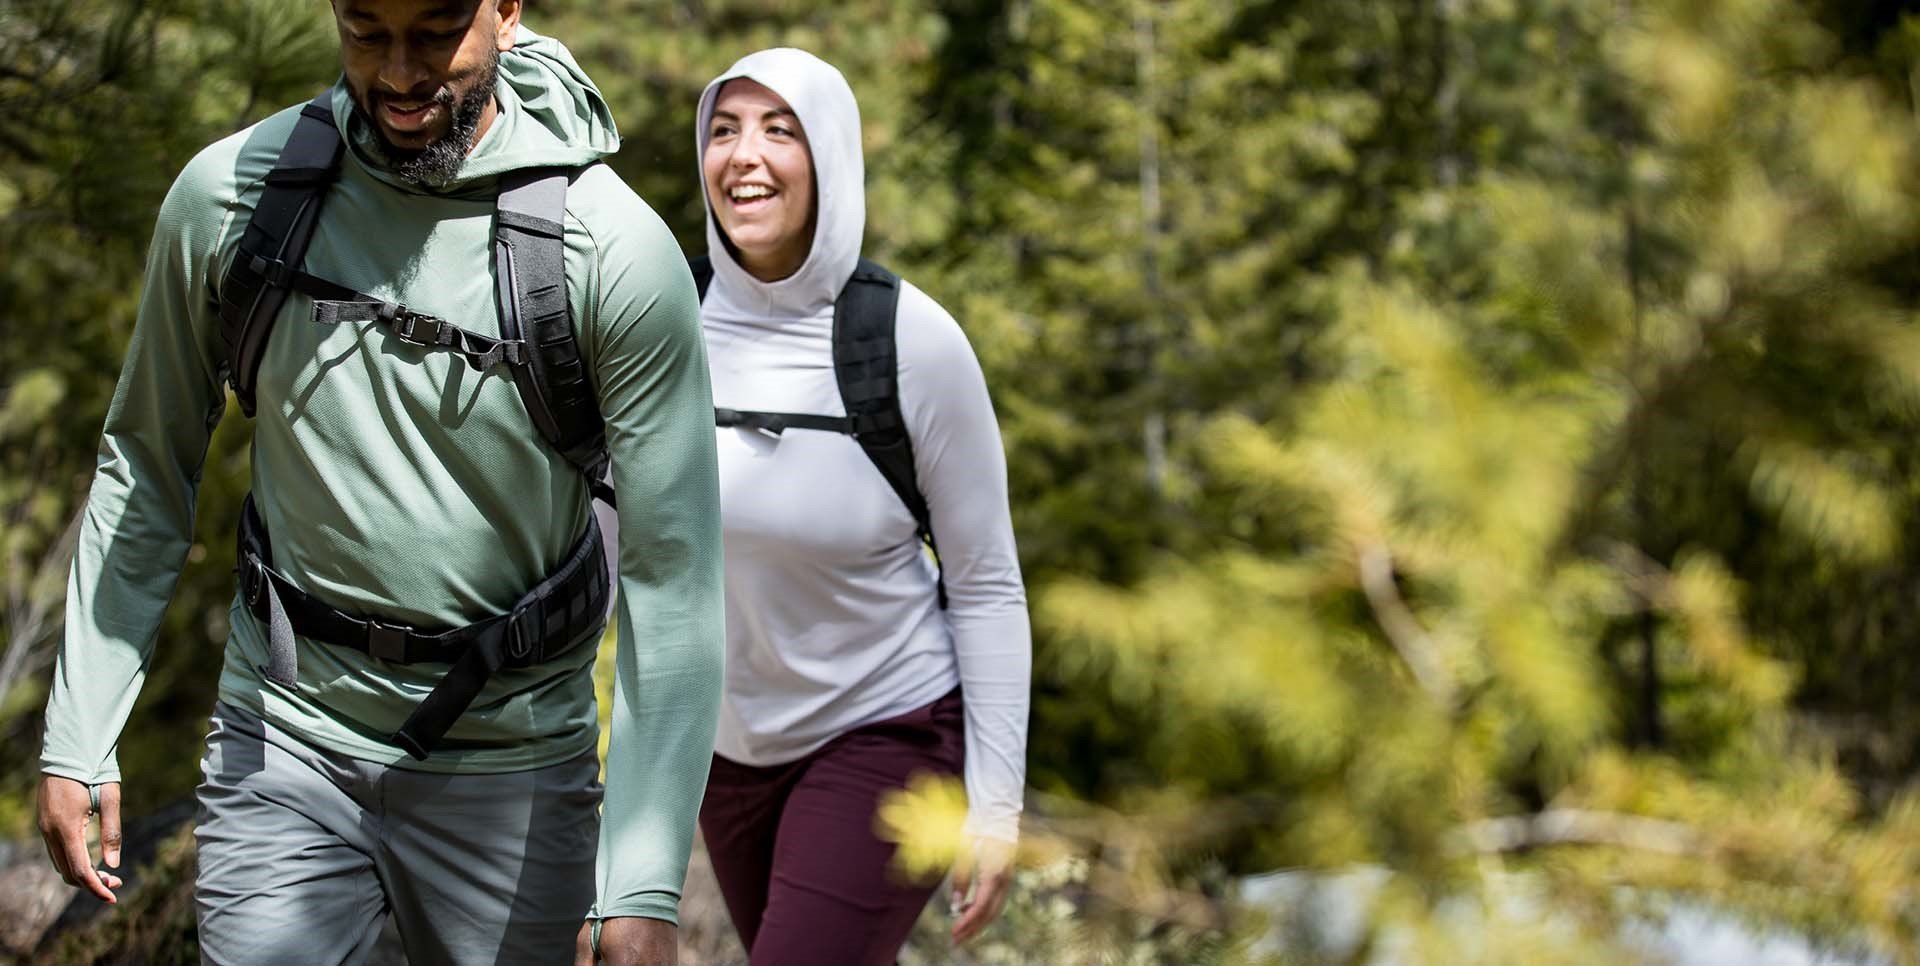 Man wearing Dark Mint Geo T Hooded Ls Shirt and Woman wearing Lilac Grey Geo T Hooded LS Shirt hiking through the sunny forest